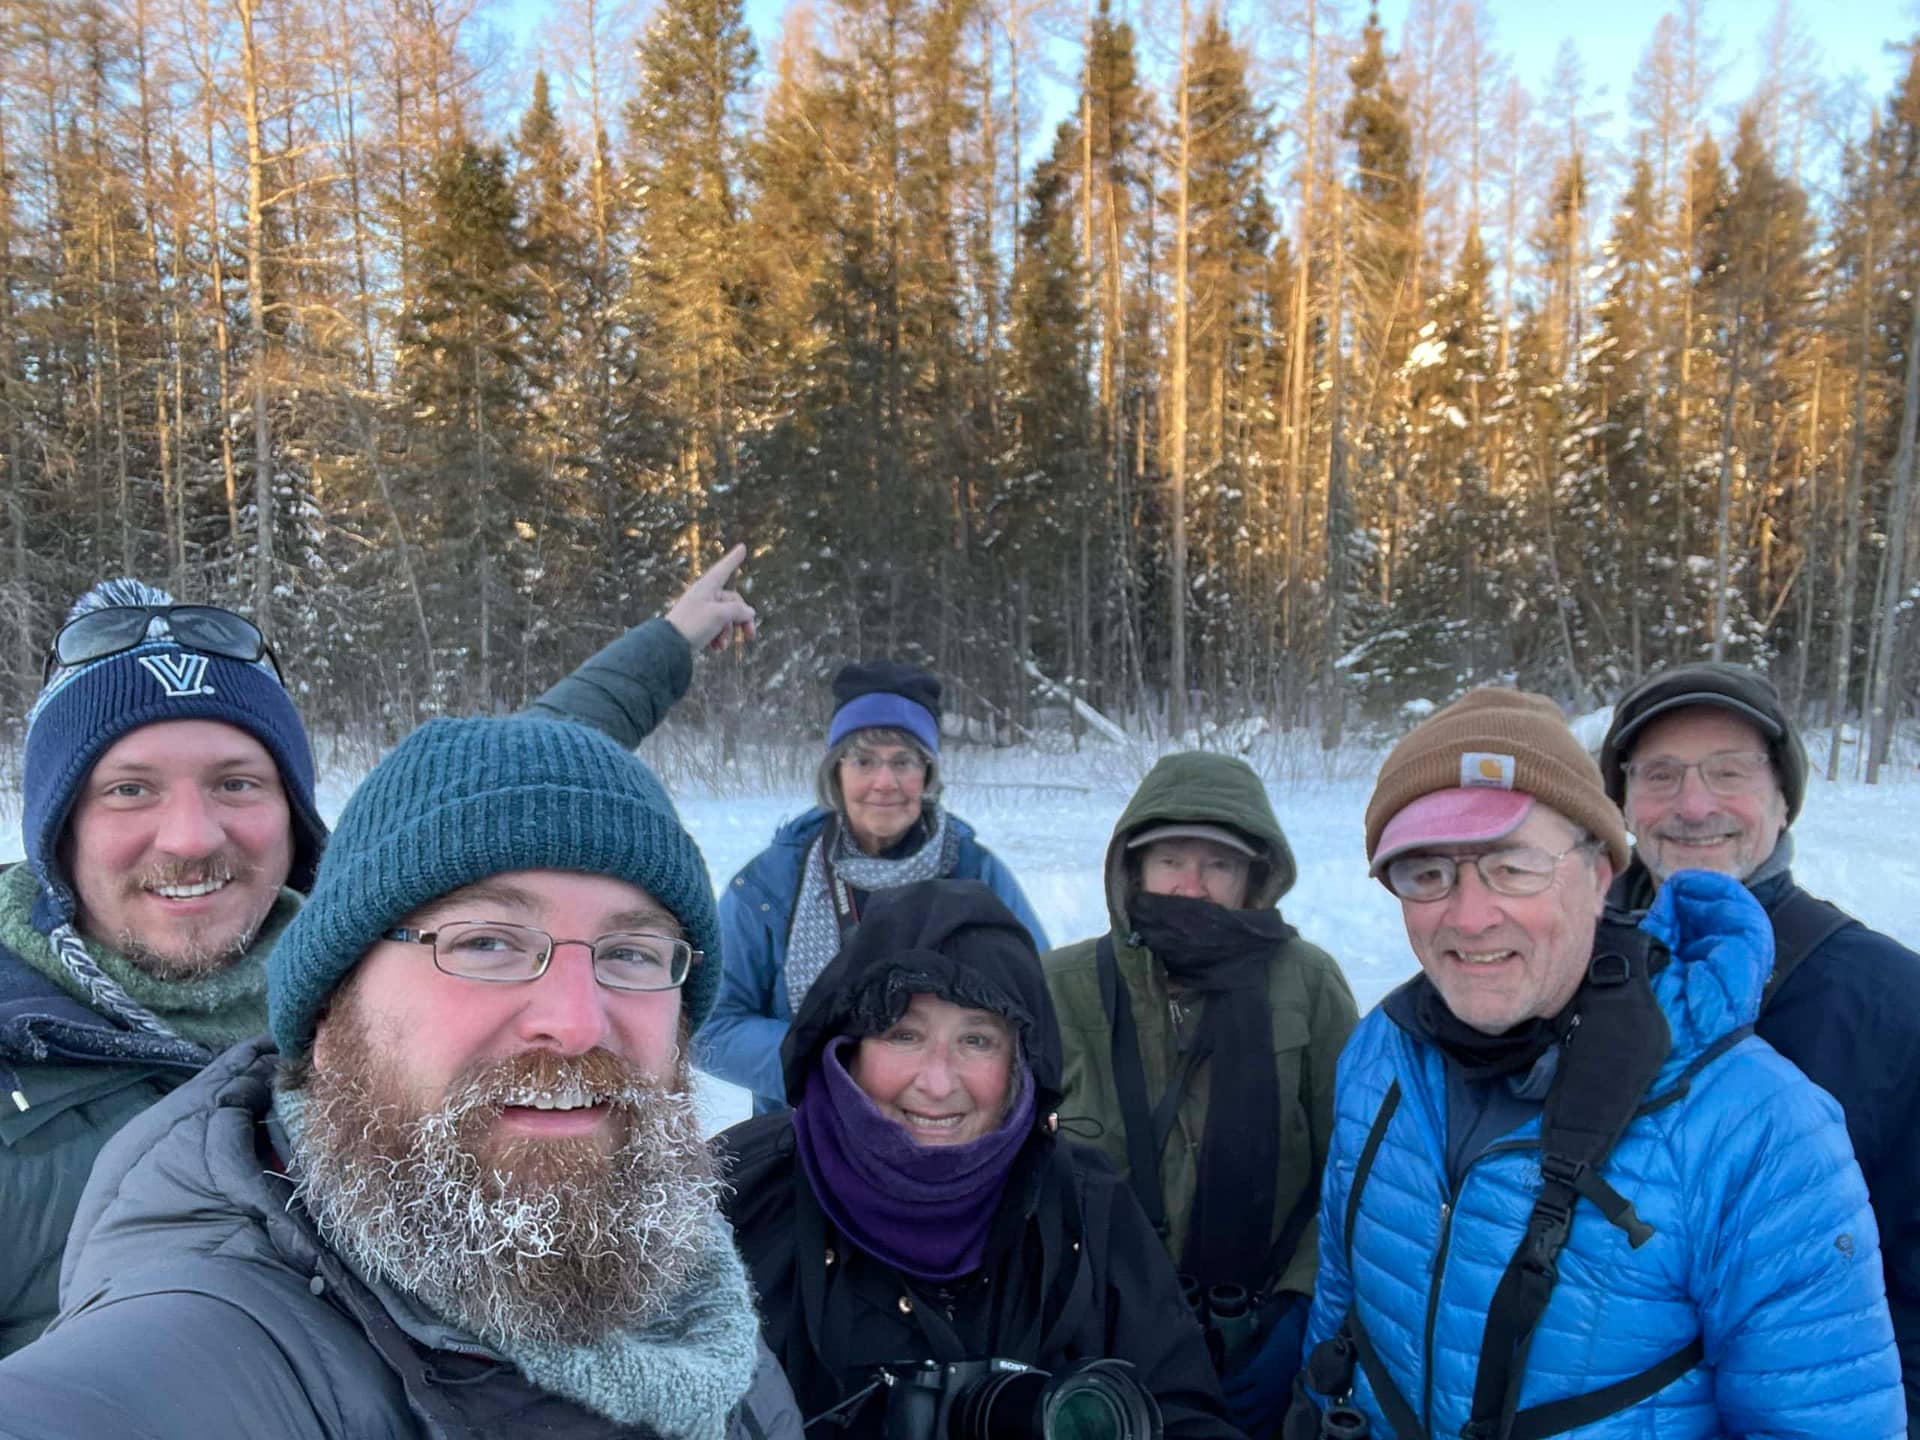 Taking a group selfie with a Great Gray Owl at -36F!